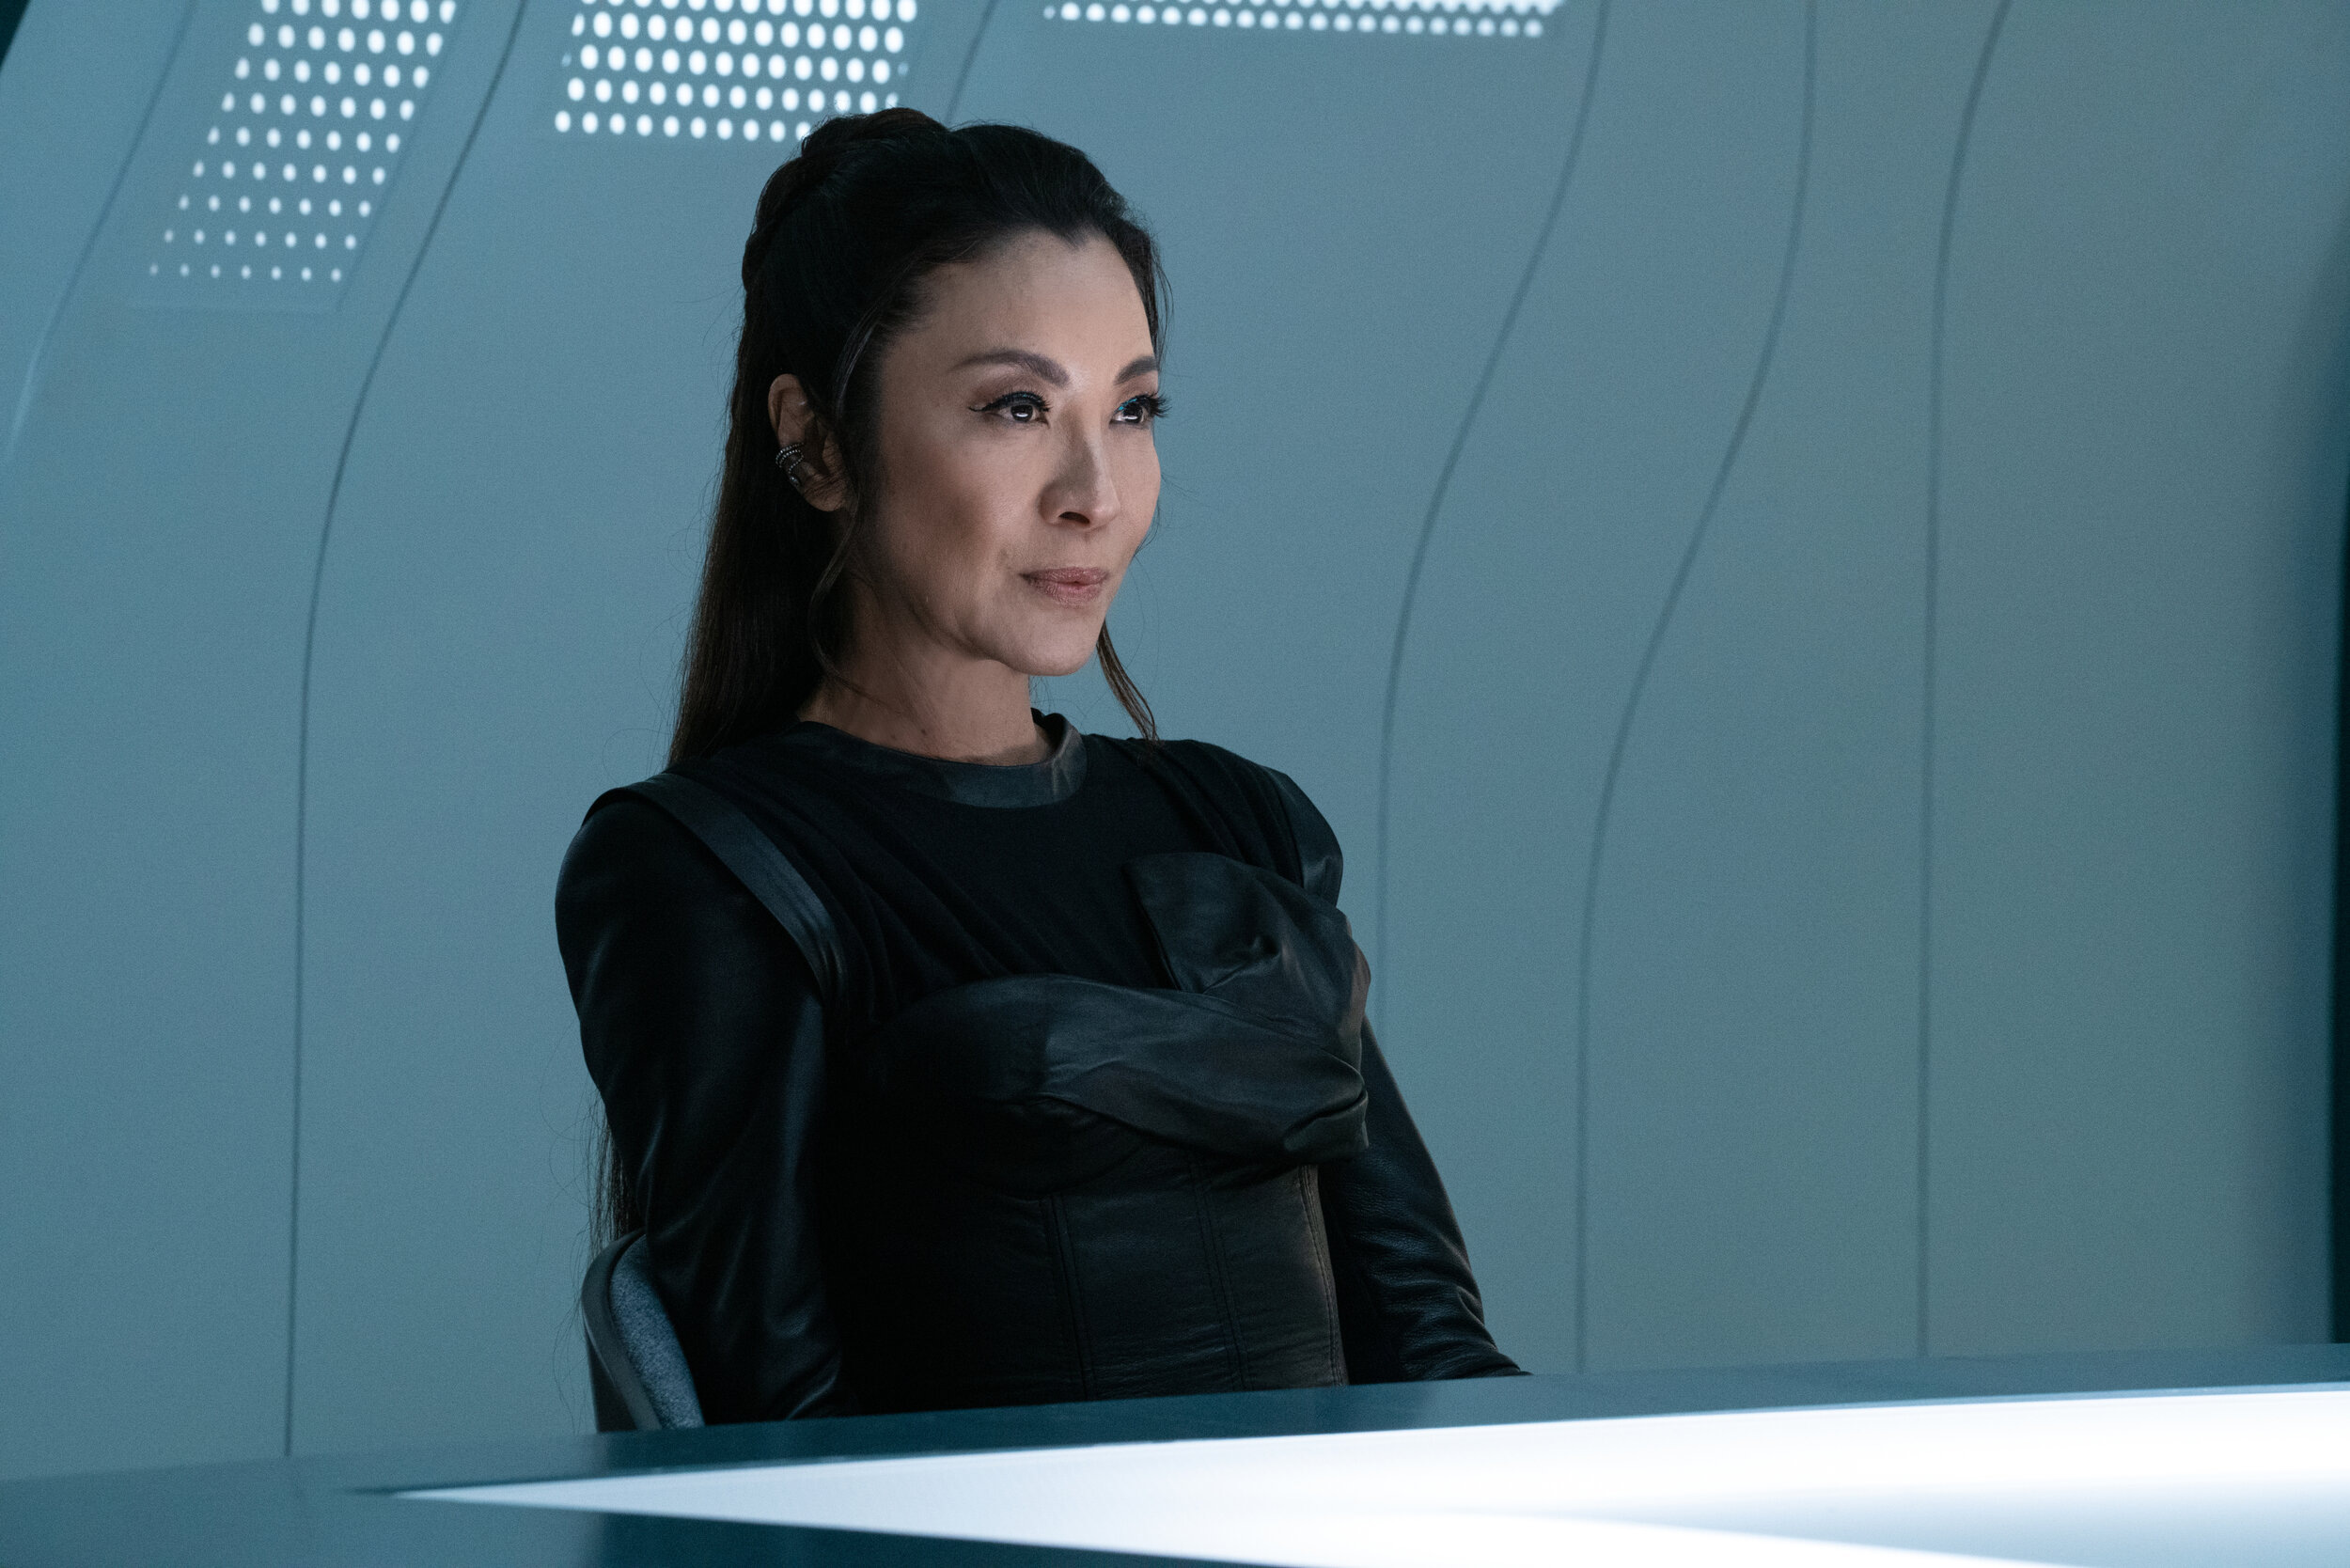   "Die Trying" -- Ep#305 -- Pictured: Michelle Yeoh as Georgiou of the CBS All Access series STAR TREK: DISCOVERY. Photo Cr: Michael Gibson/CBS ©2020 CBS Interactive, Inc. All Rights Reserved.  